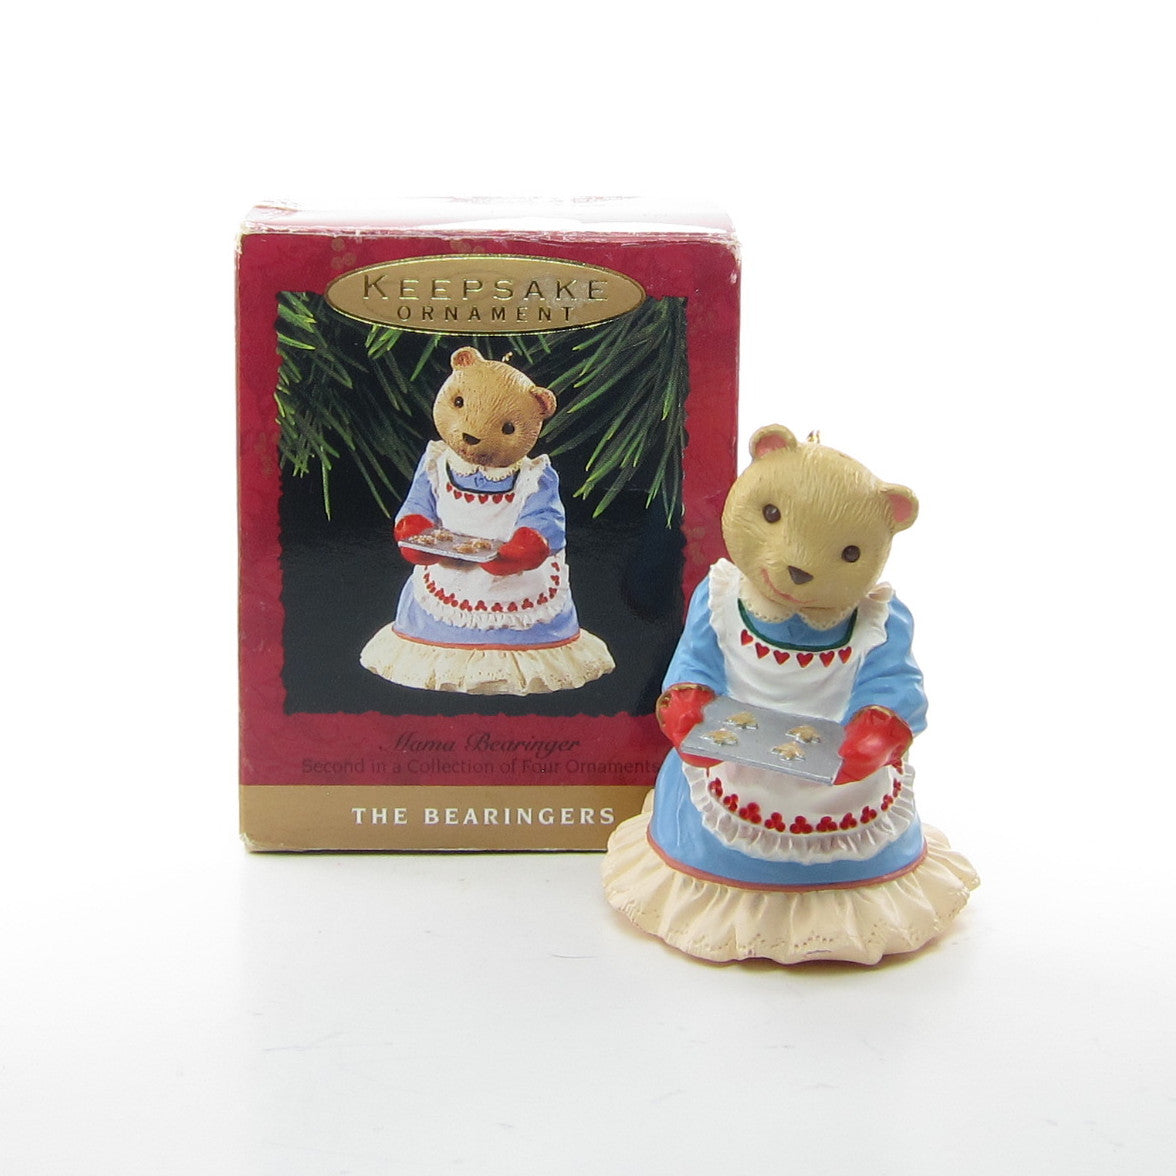 Mama Bearinger ornament from The Bearingers of Victoria Circle collection